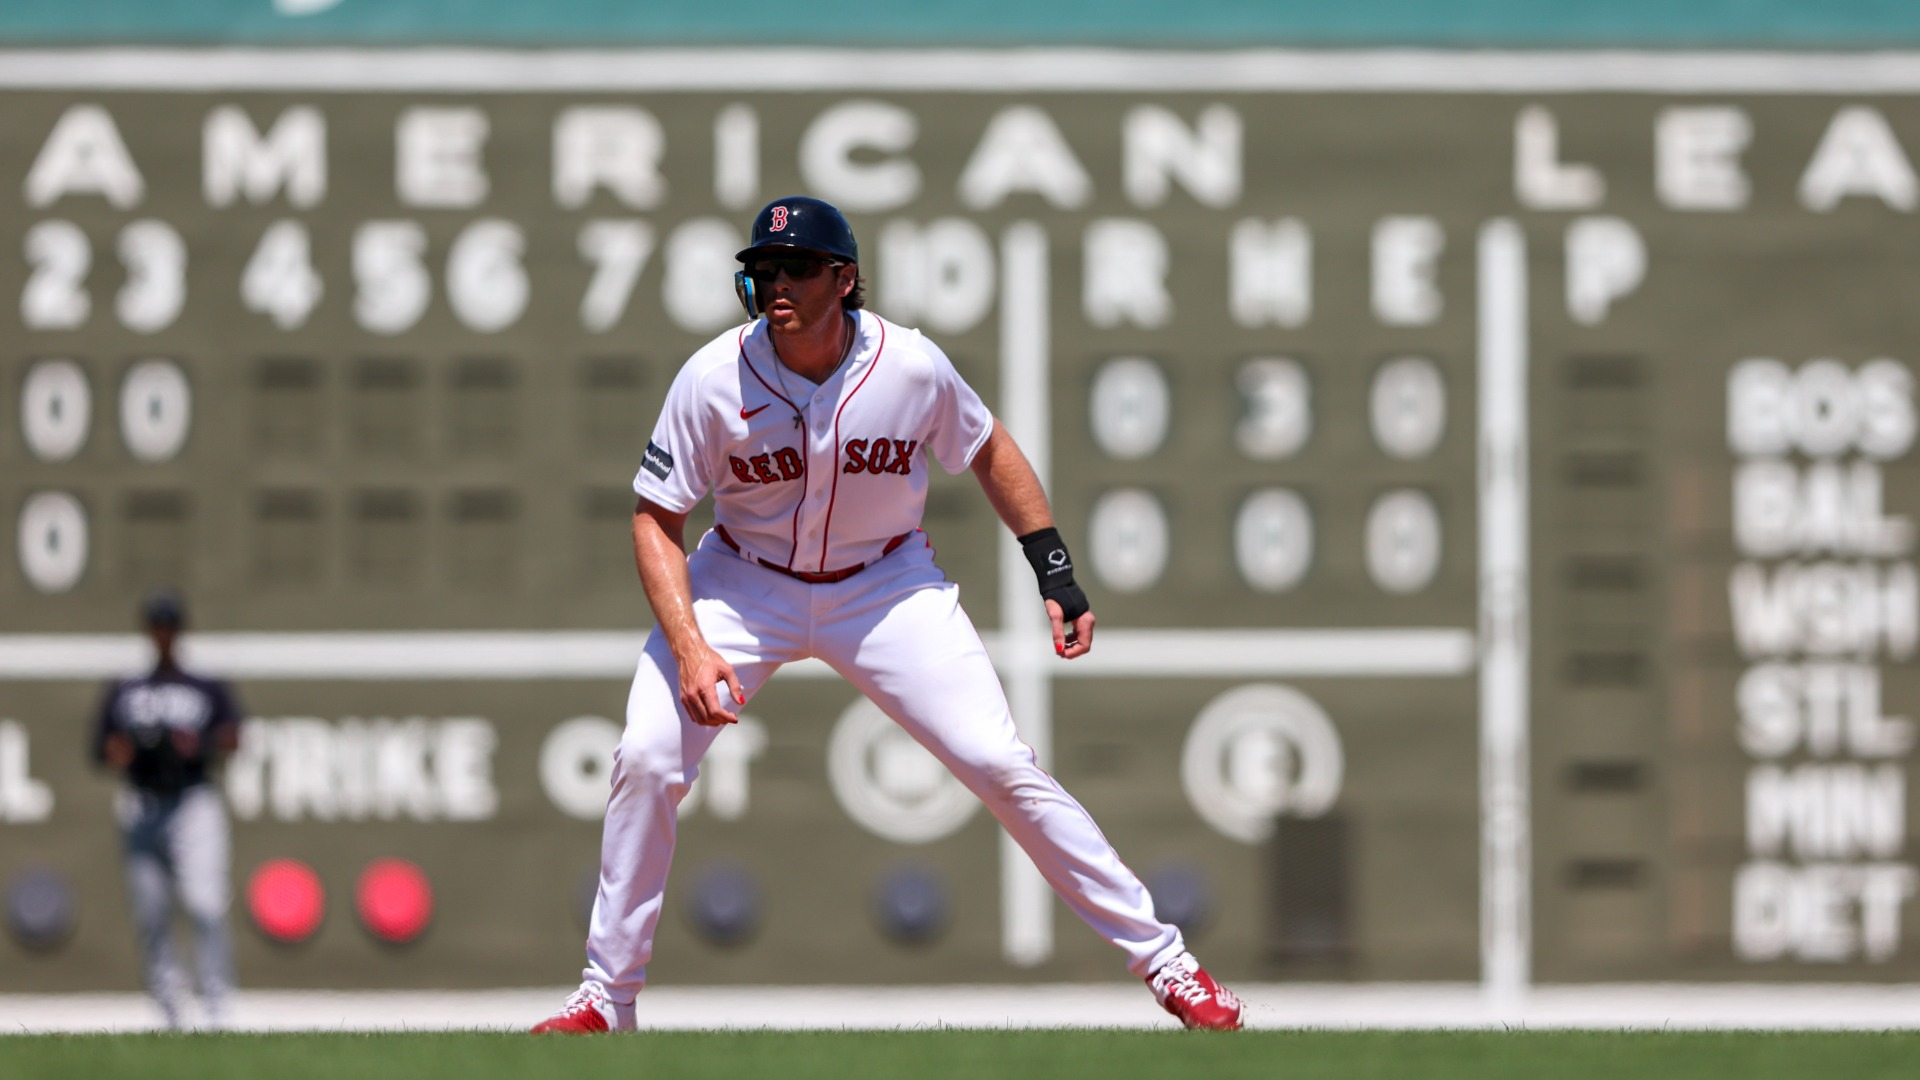 Bobby Dalbec to meet Red Sox in Tampa, but team hasn't made roster